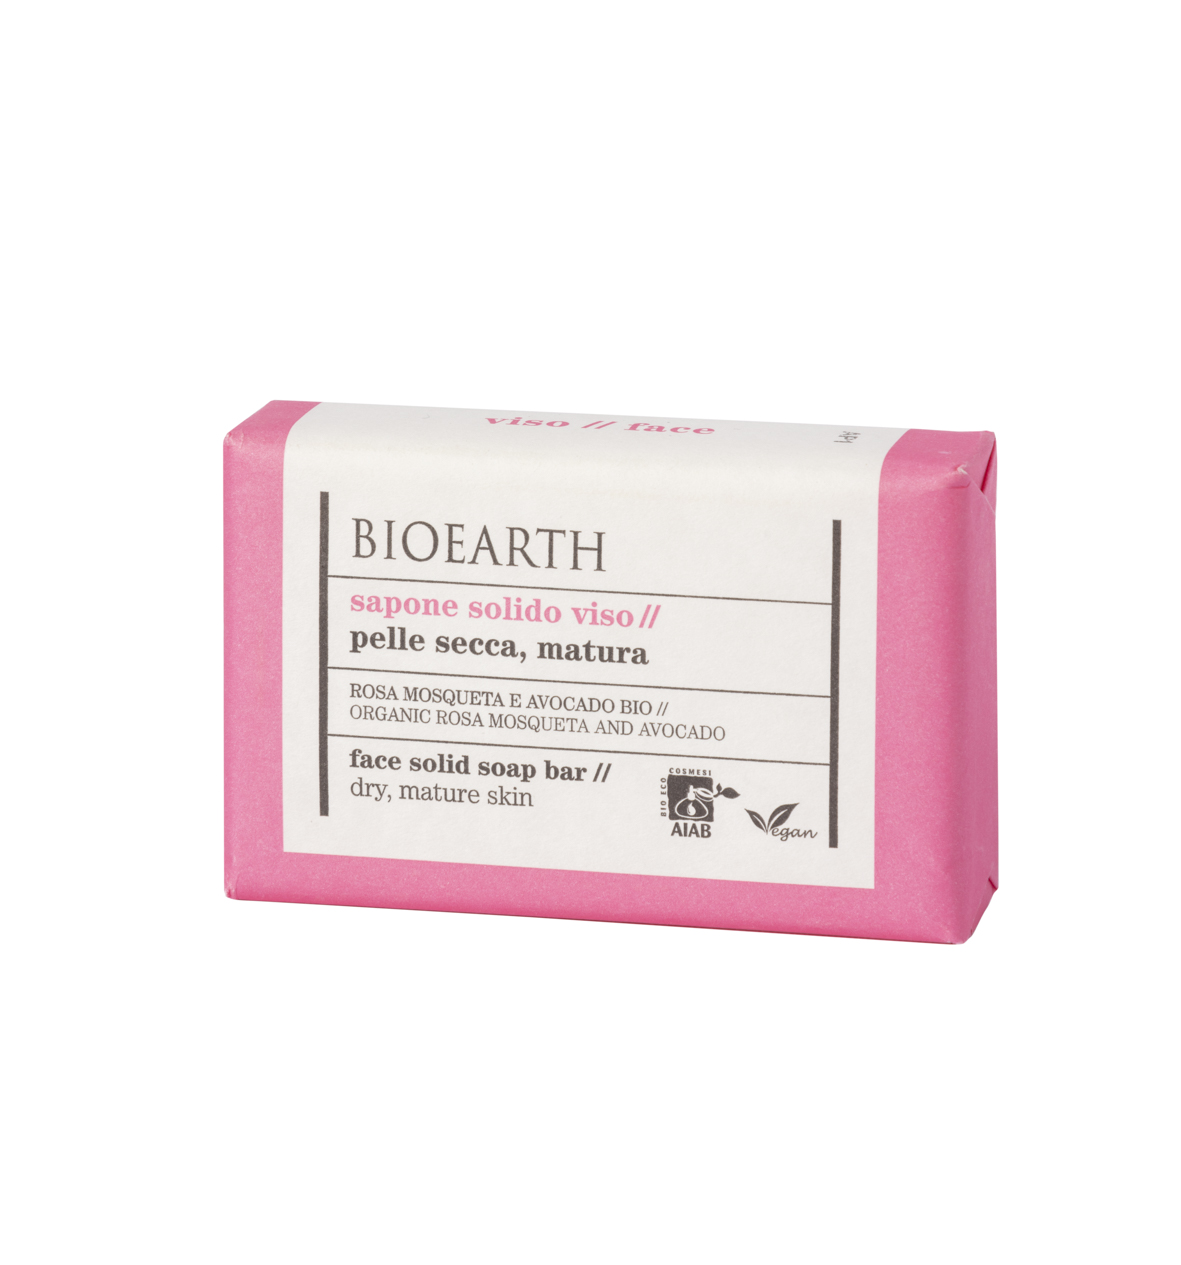 Bioearth - Solid Soaps Face Solid Soap - Organic Rosa Mosqueta And Avocado - 150g